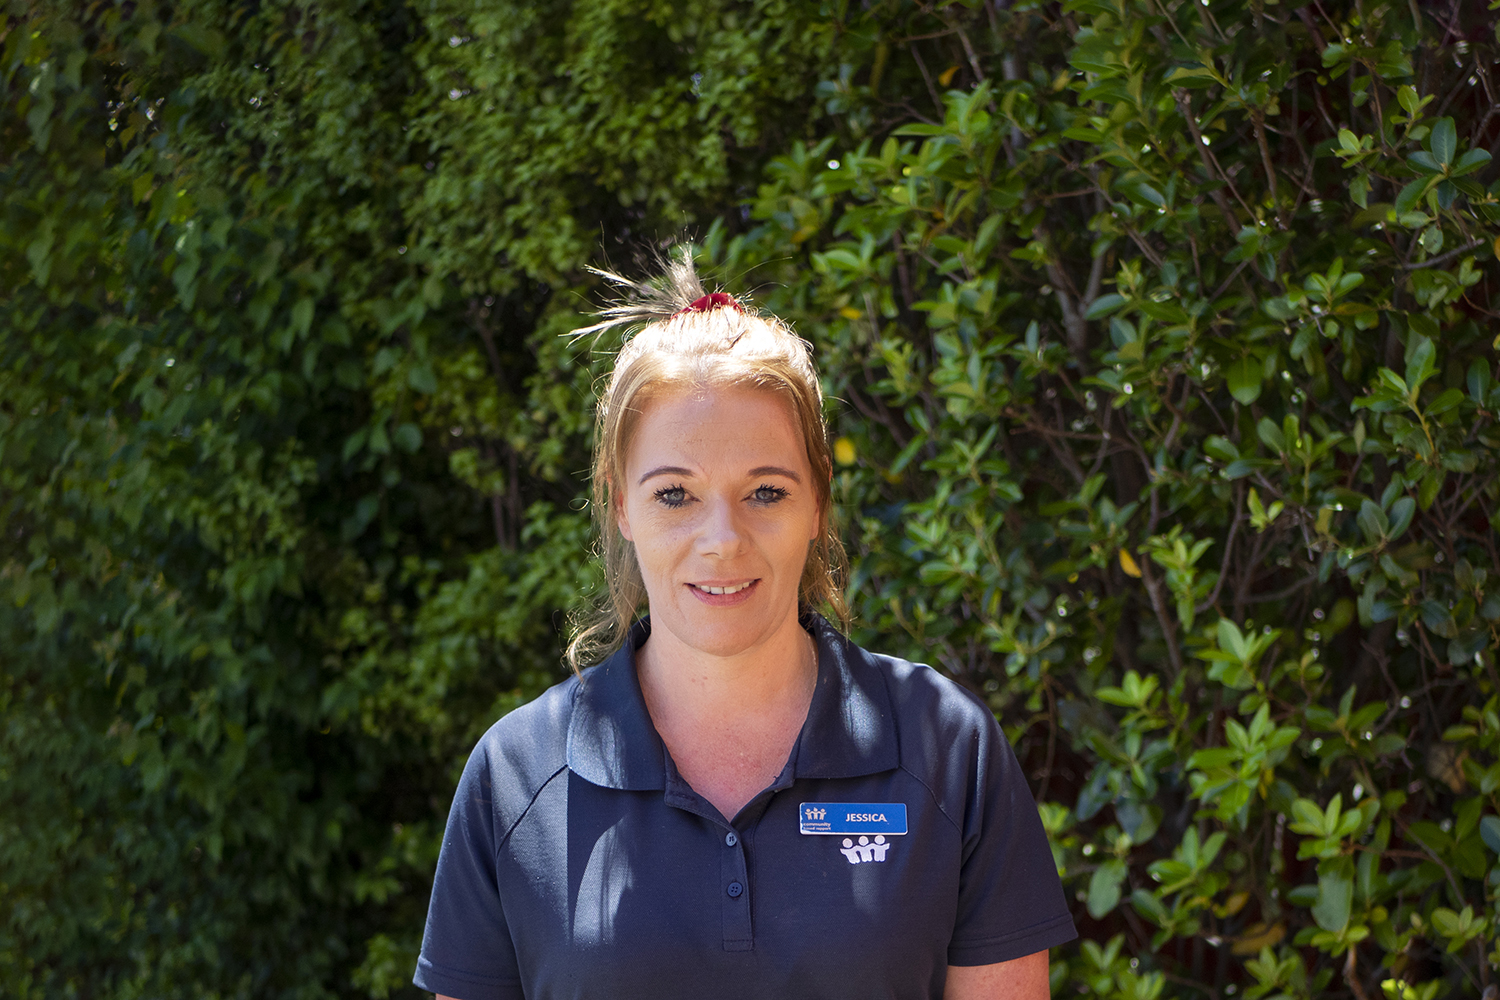 A woman in blue polo shirt and name tag stands for a photo in front of a green hedge